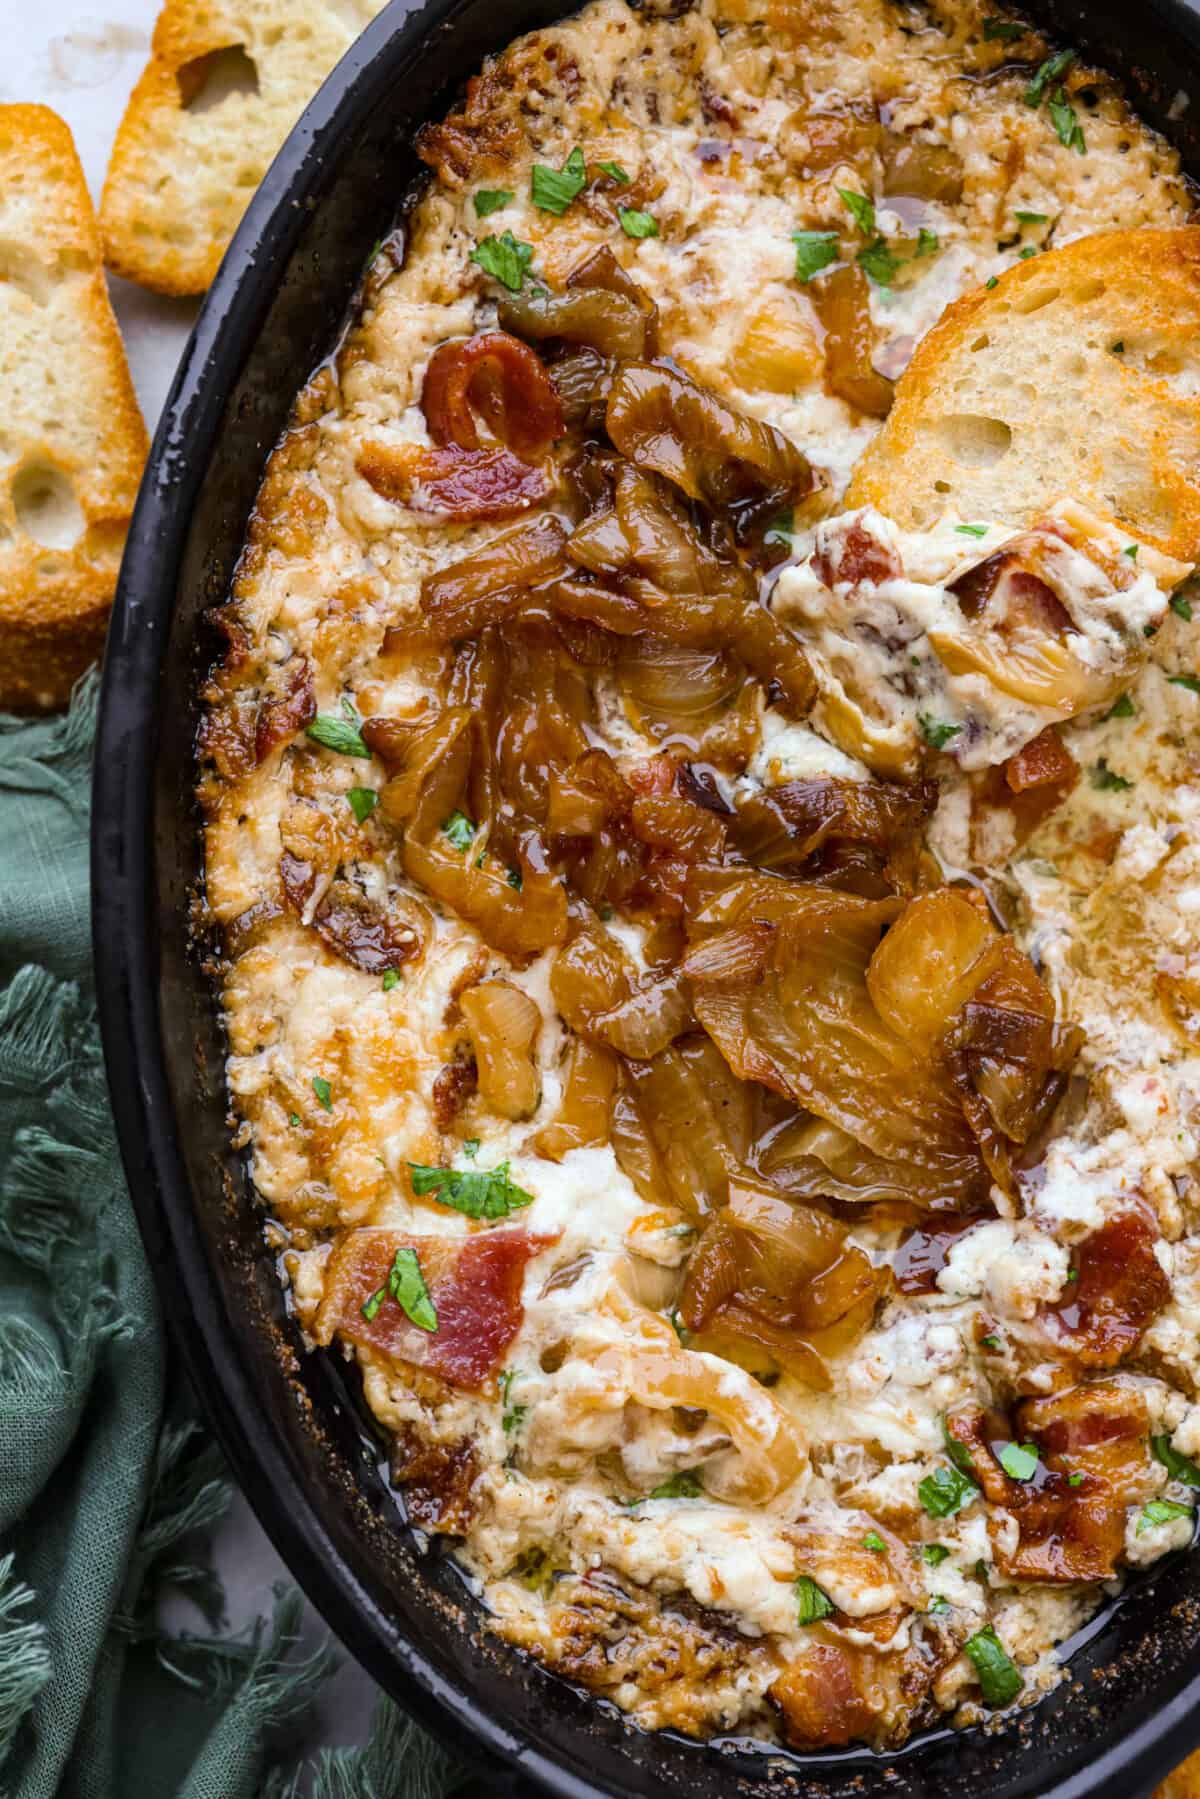 Caramelized onions added to a cheesy dip.